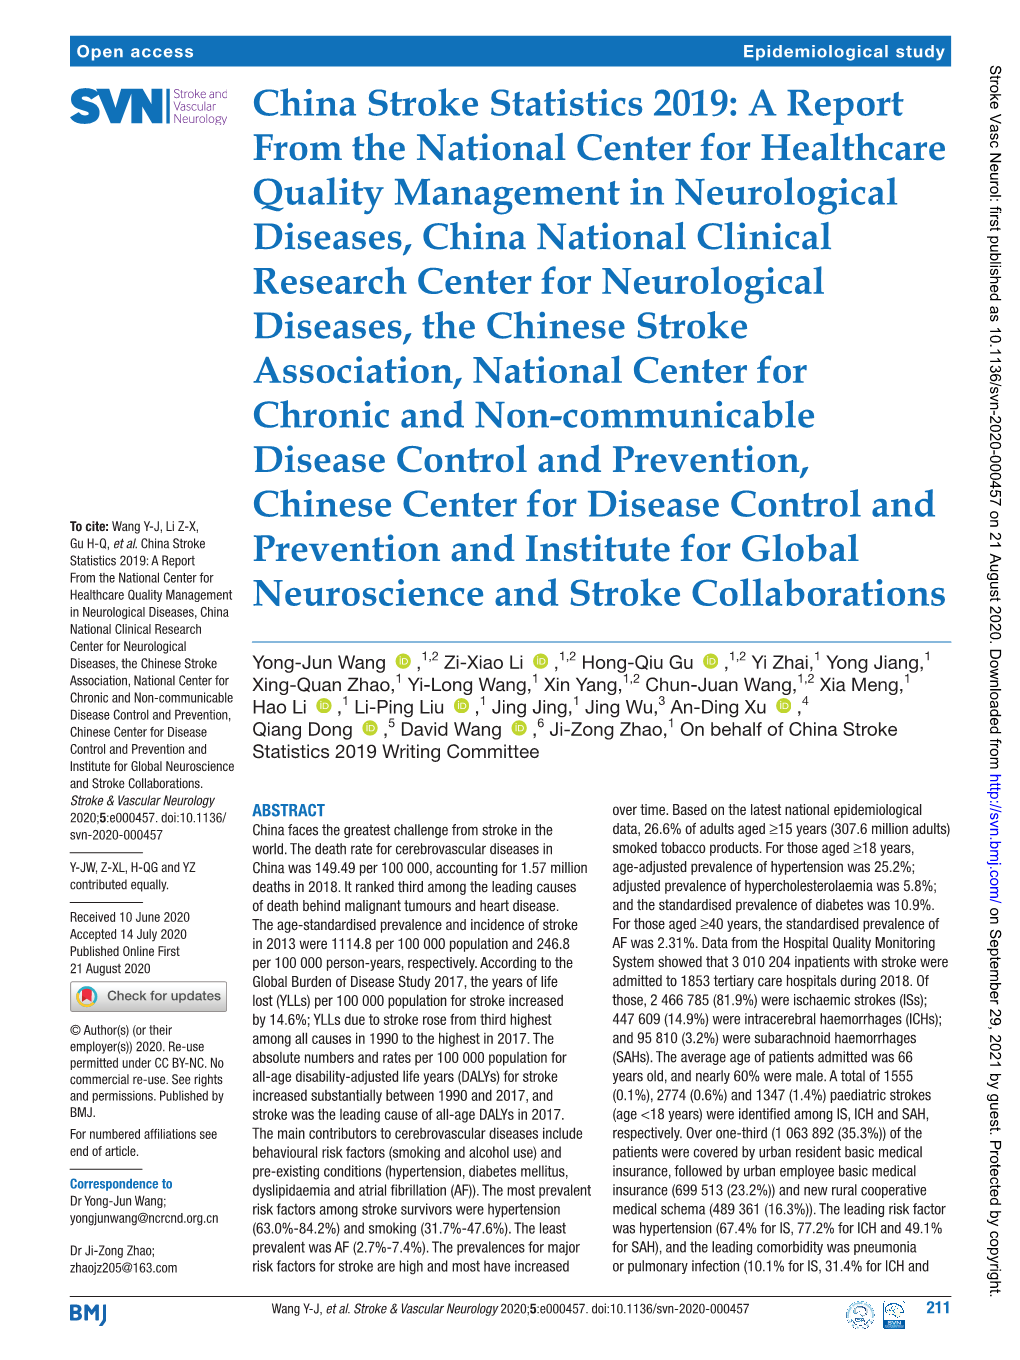 A Report from the National Center for Healthcare Quality Management In